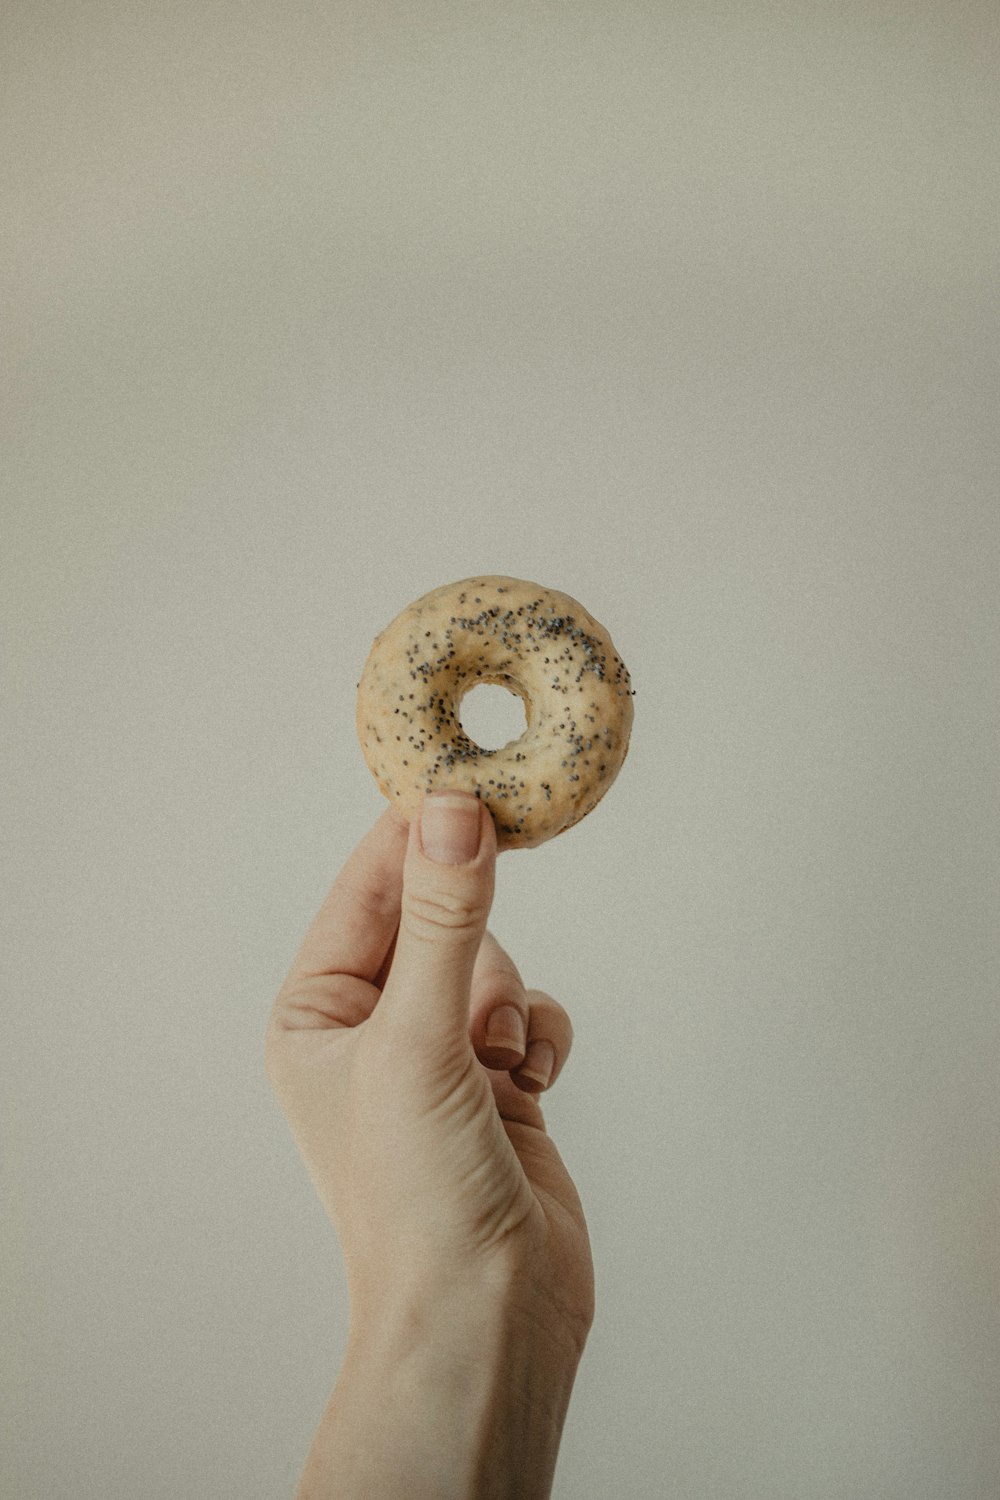 person holding doughnut with chocolate filling